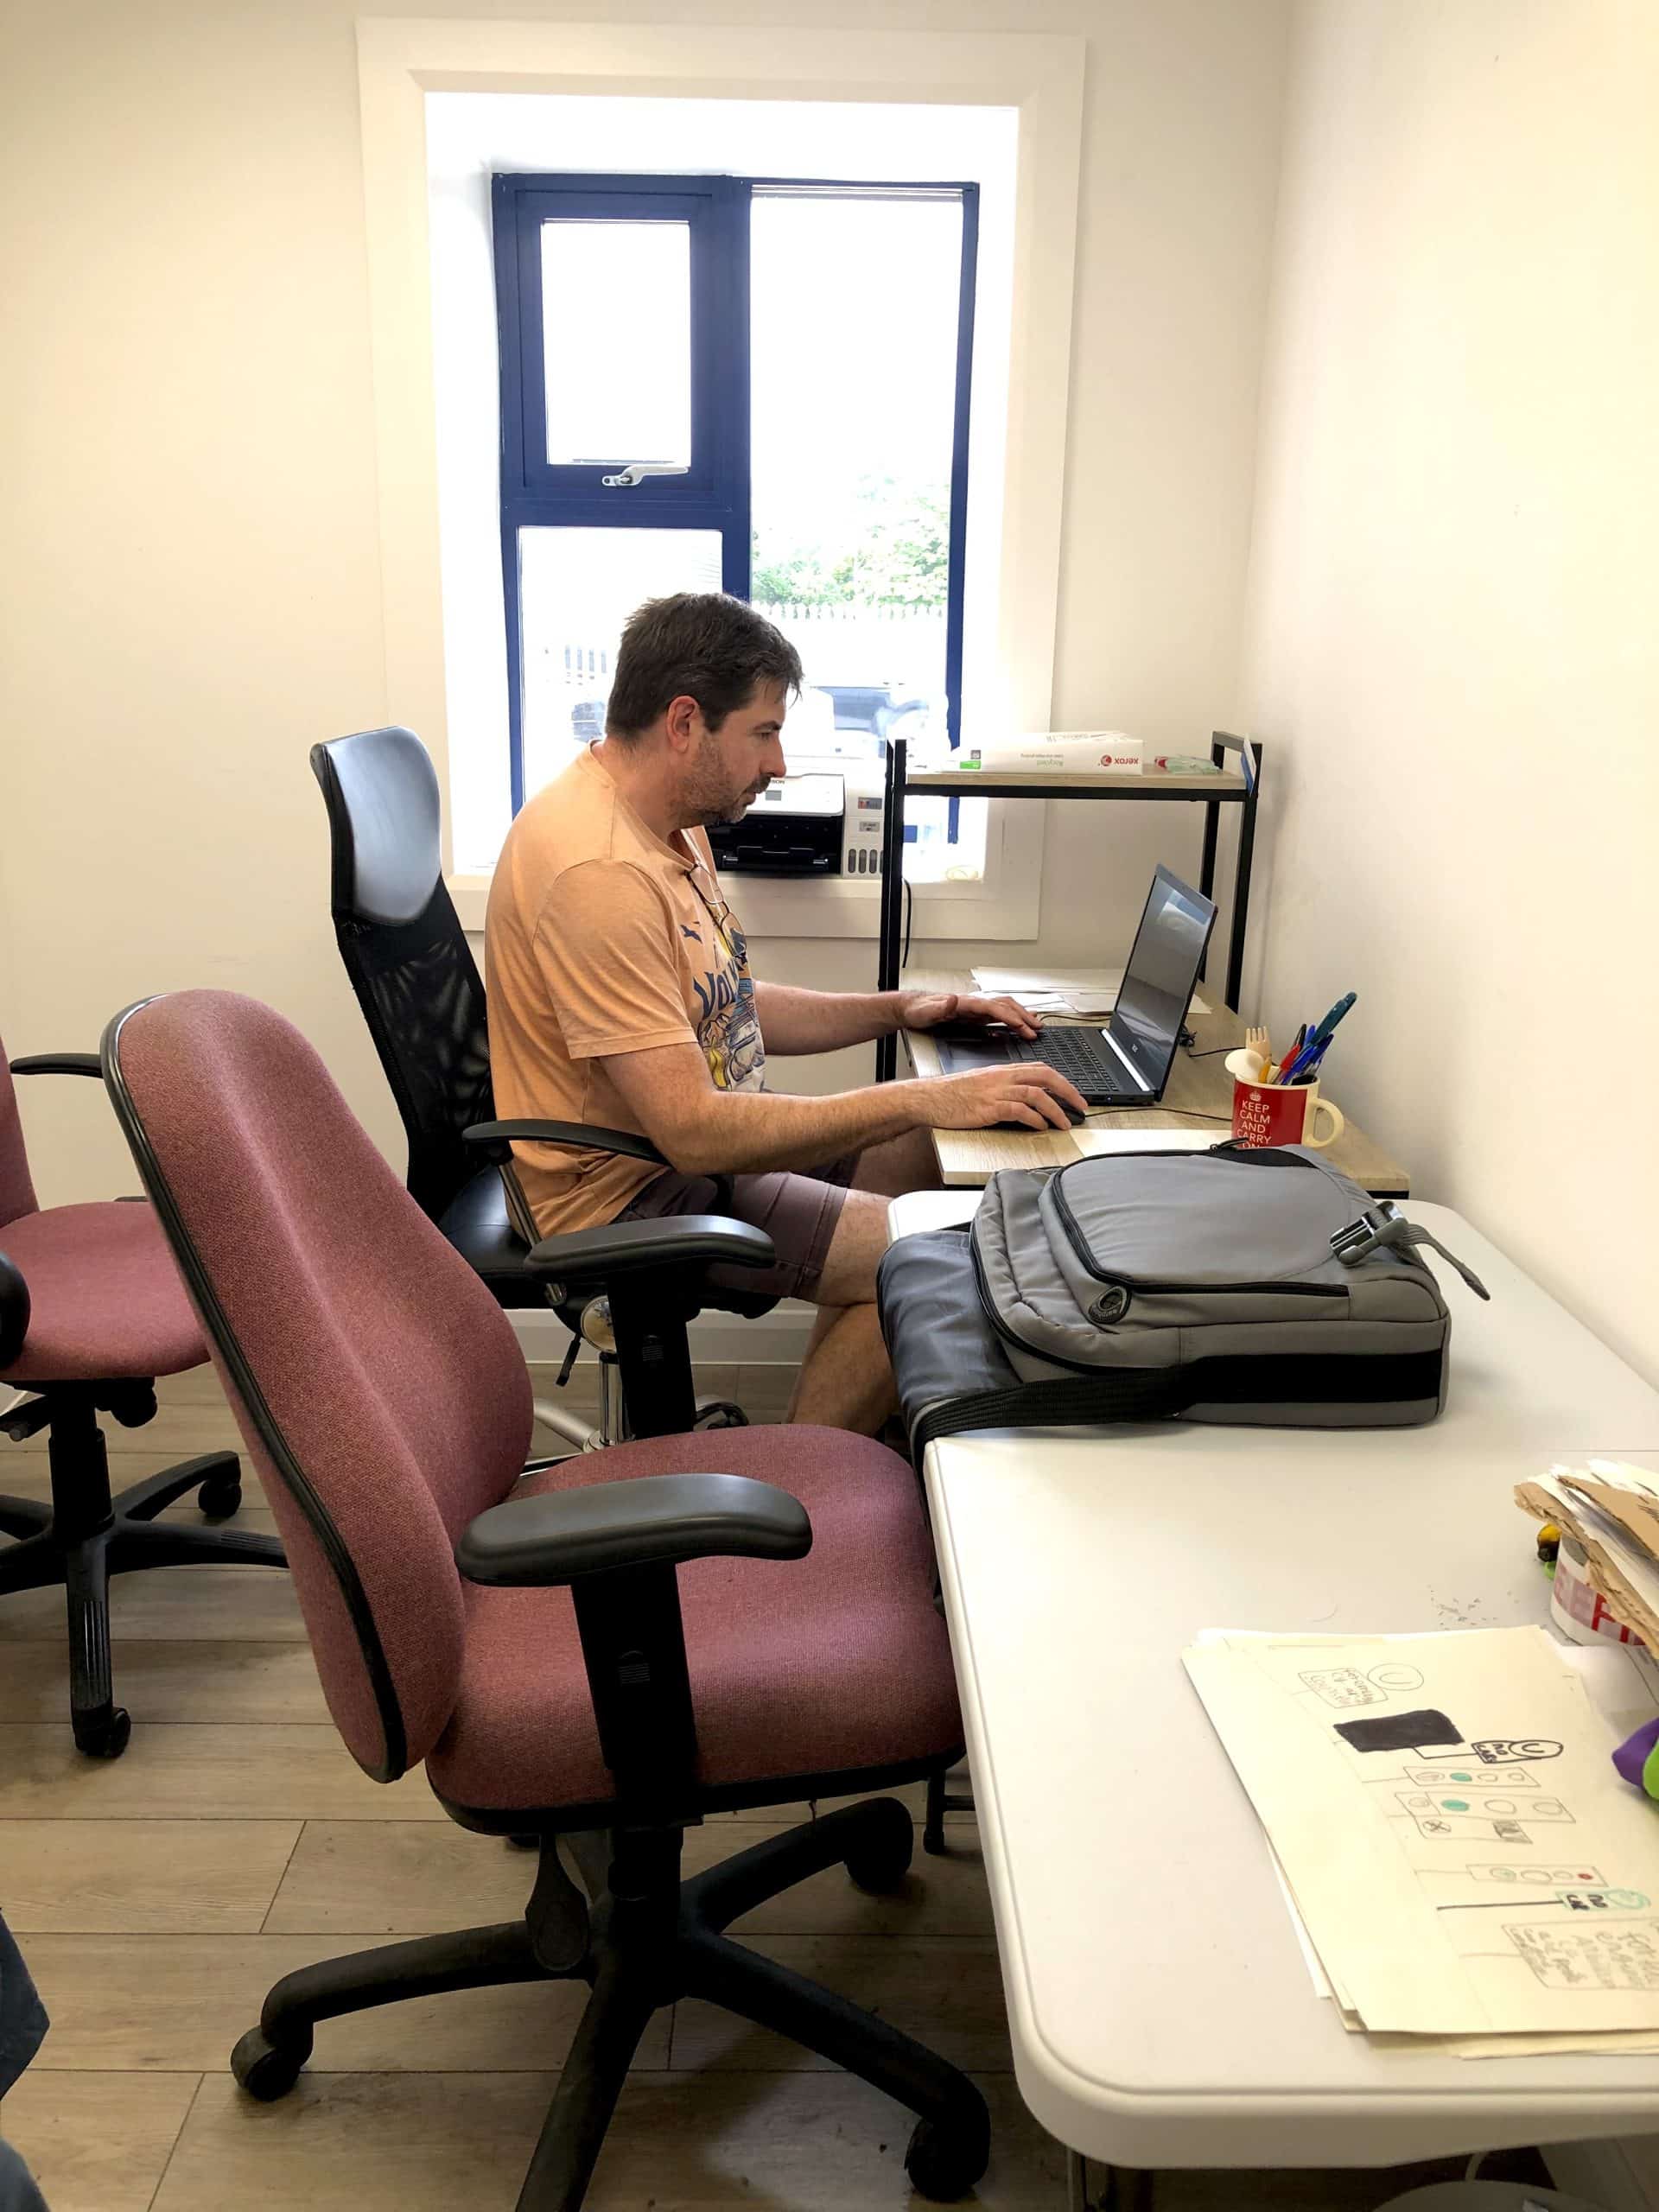 Employee at a desk in an office space